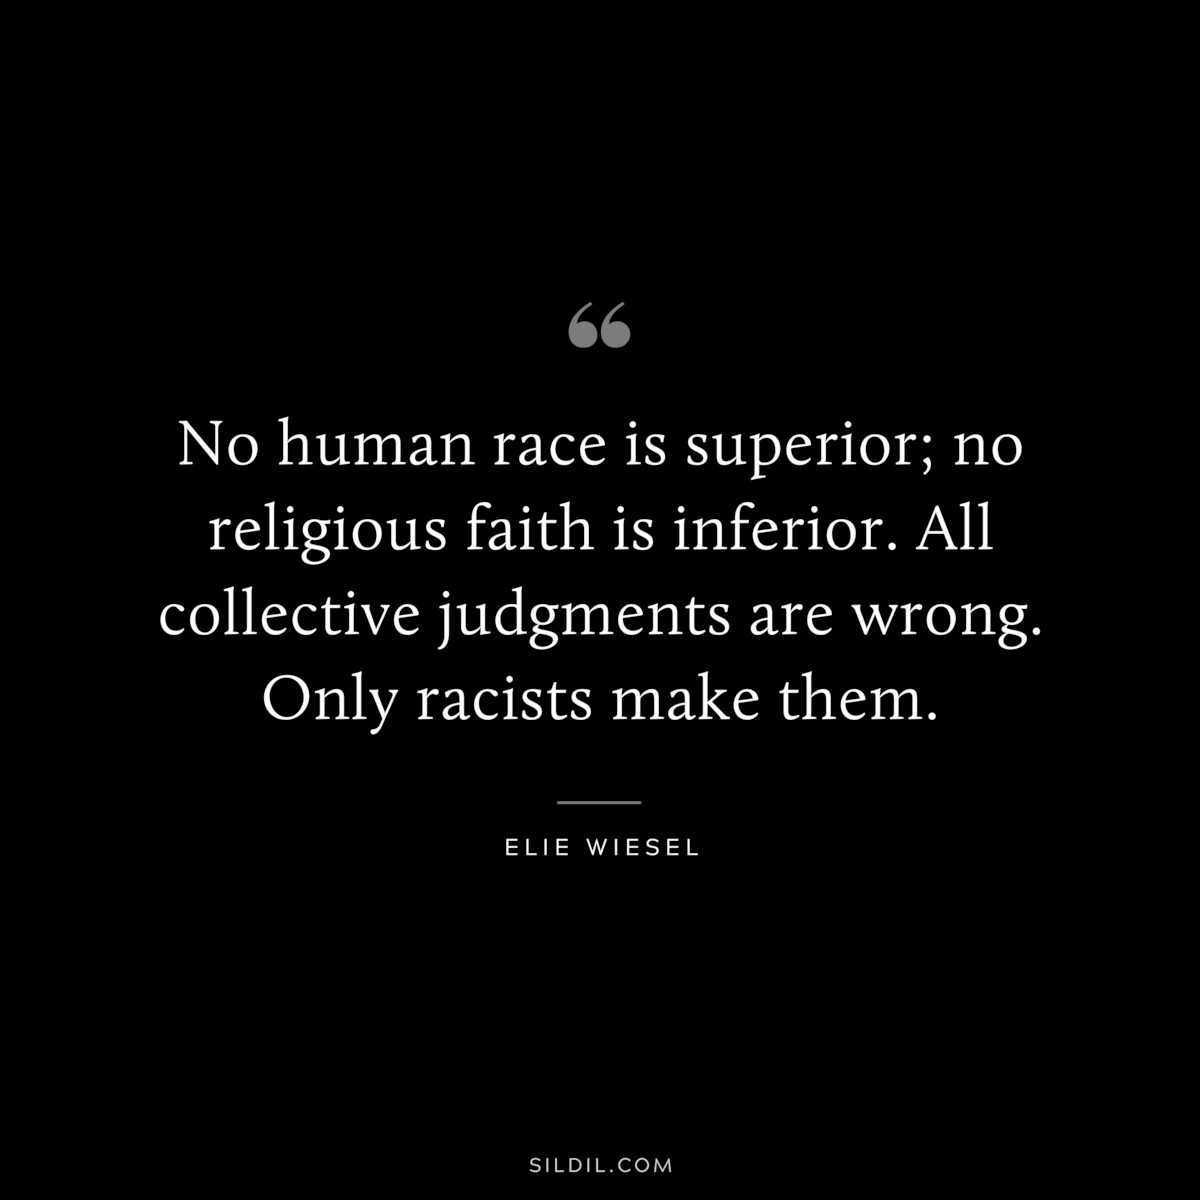 No human race is superior; no religious faith is inferior. All collective judgments are wrong. Only racists make them. ― Elie Wiesel